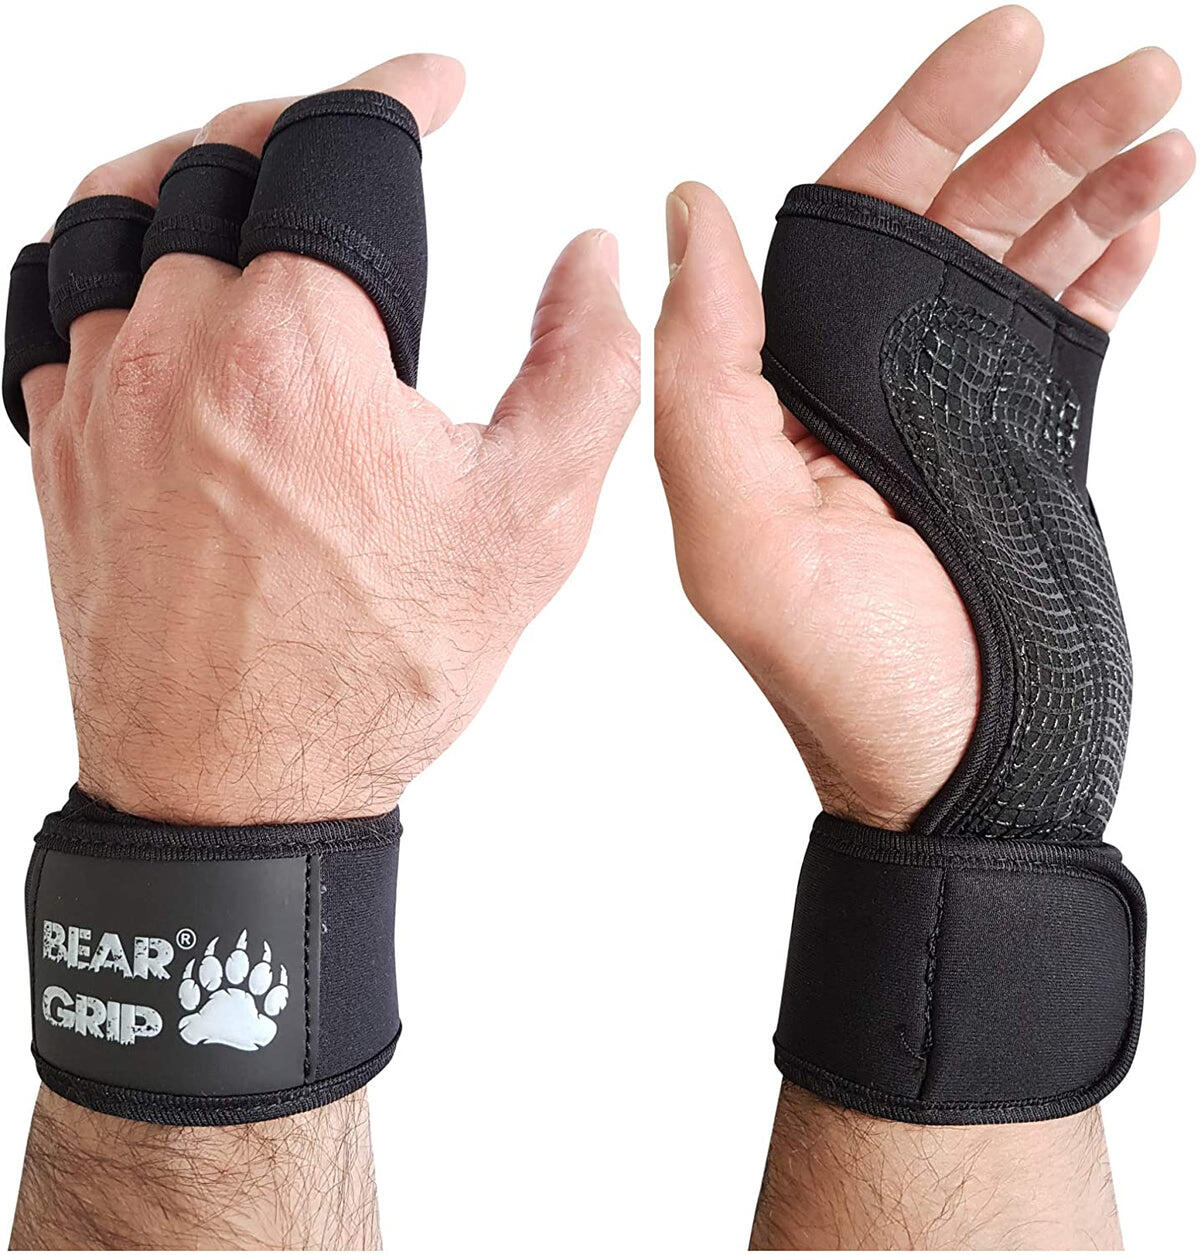 BEAR GRIP - Open Workout Gloves for Weight Lifting 1/6